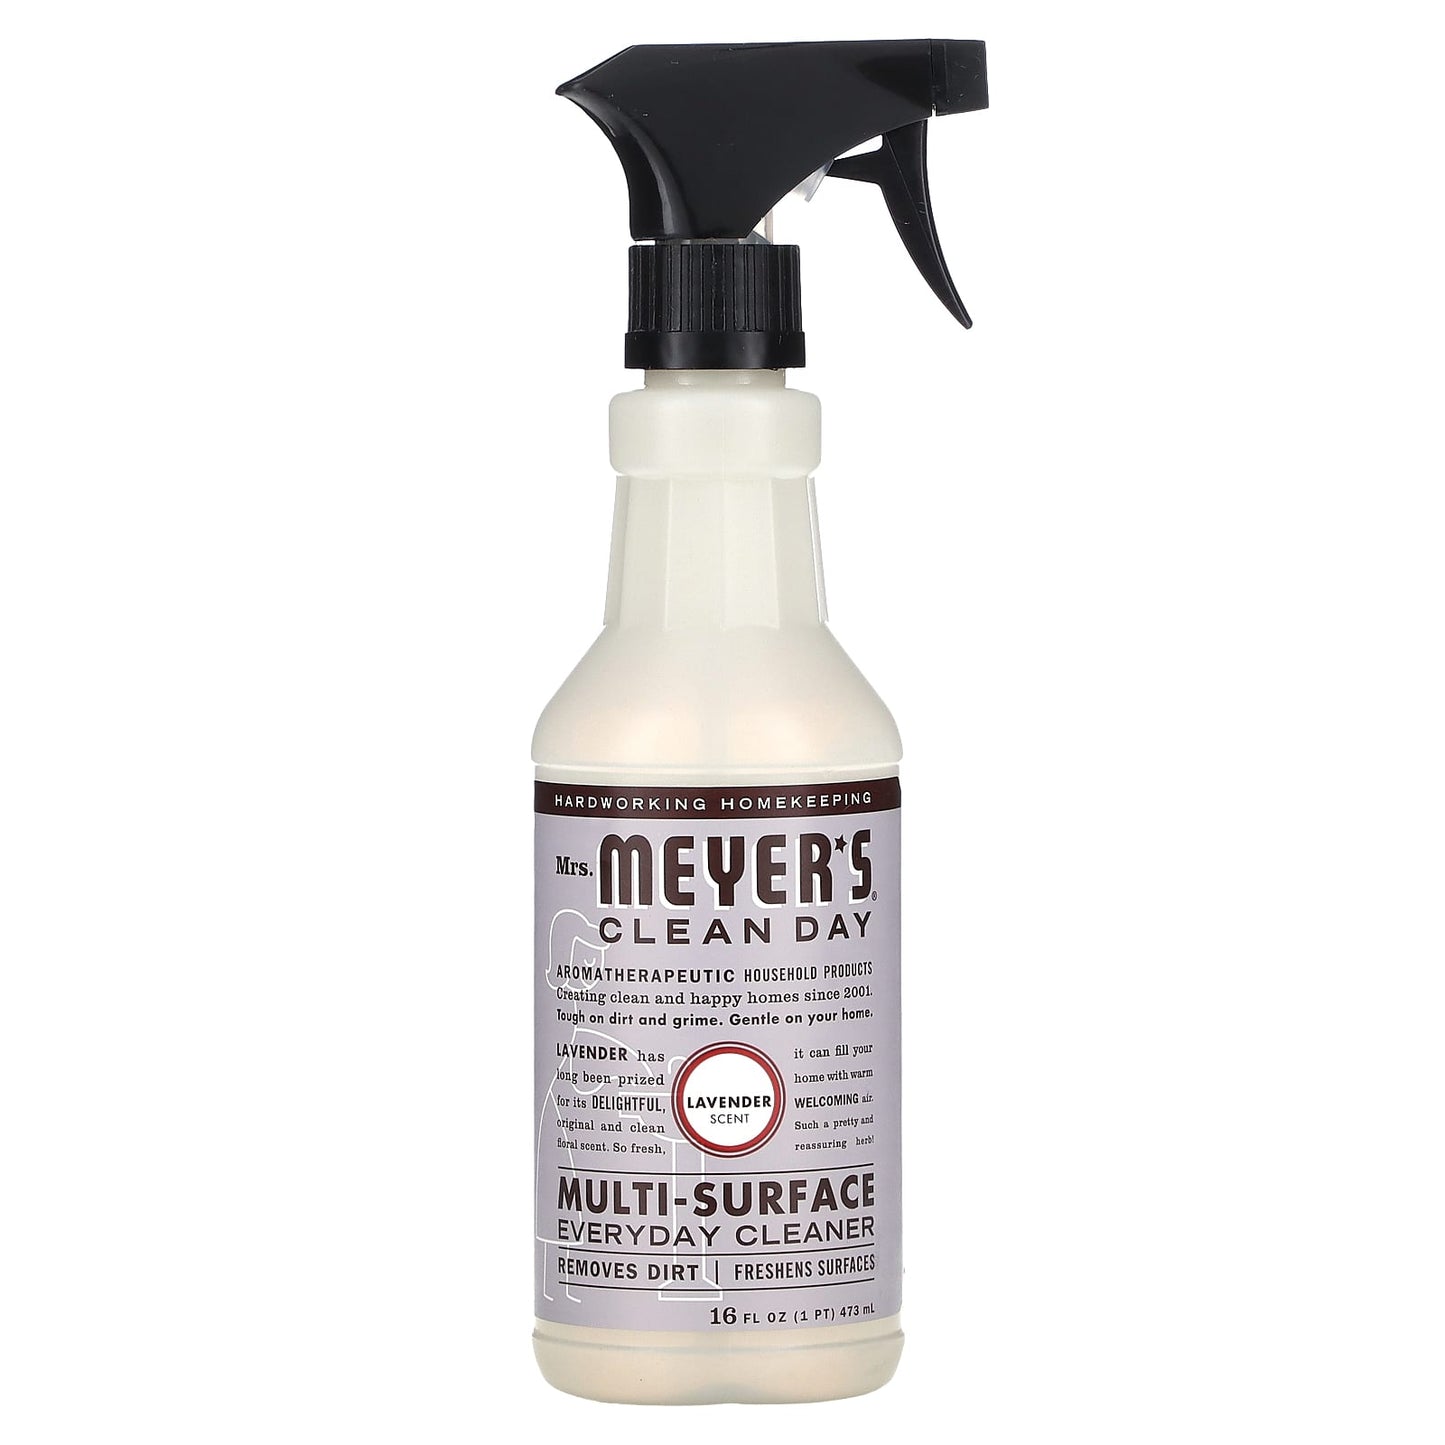 Mrs. Meyers Clean Day-Multi-Surface Everyday Cleaner-Lavender Scent-16 fl oz (473 ml)